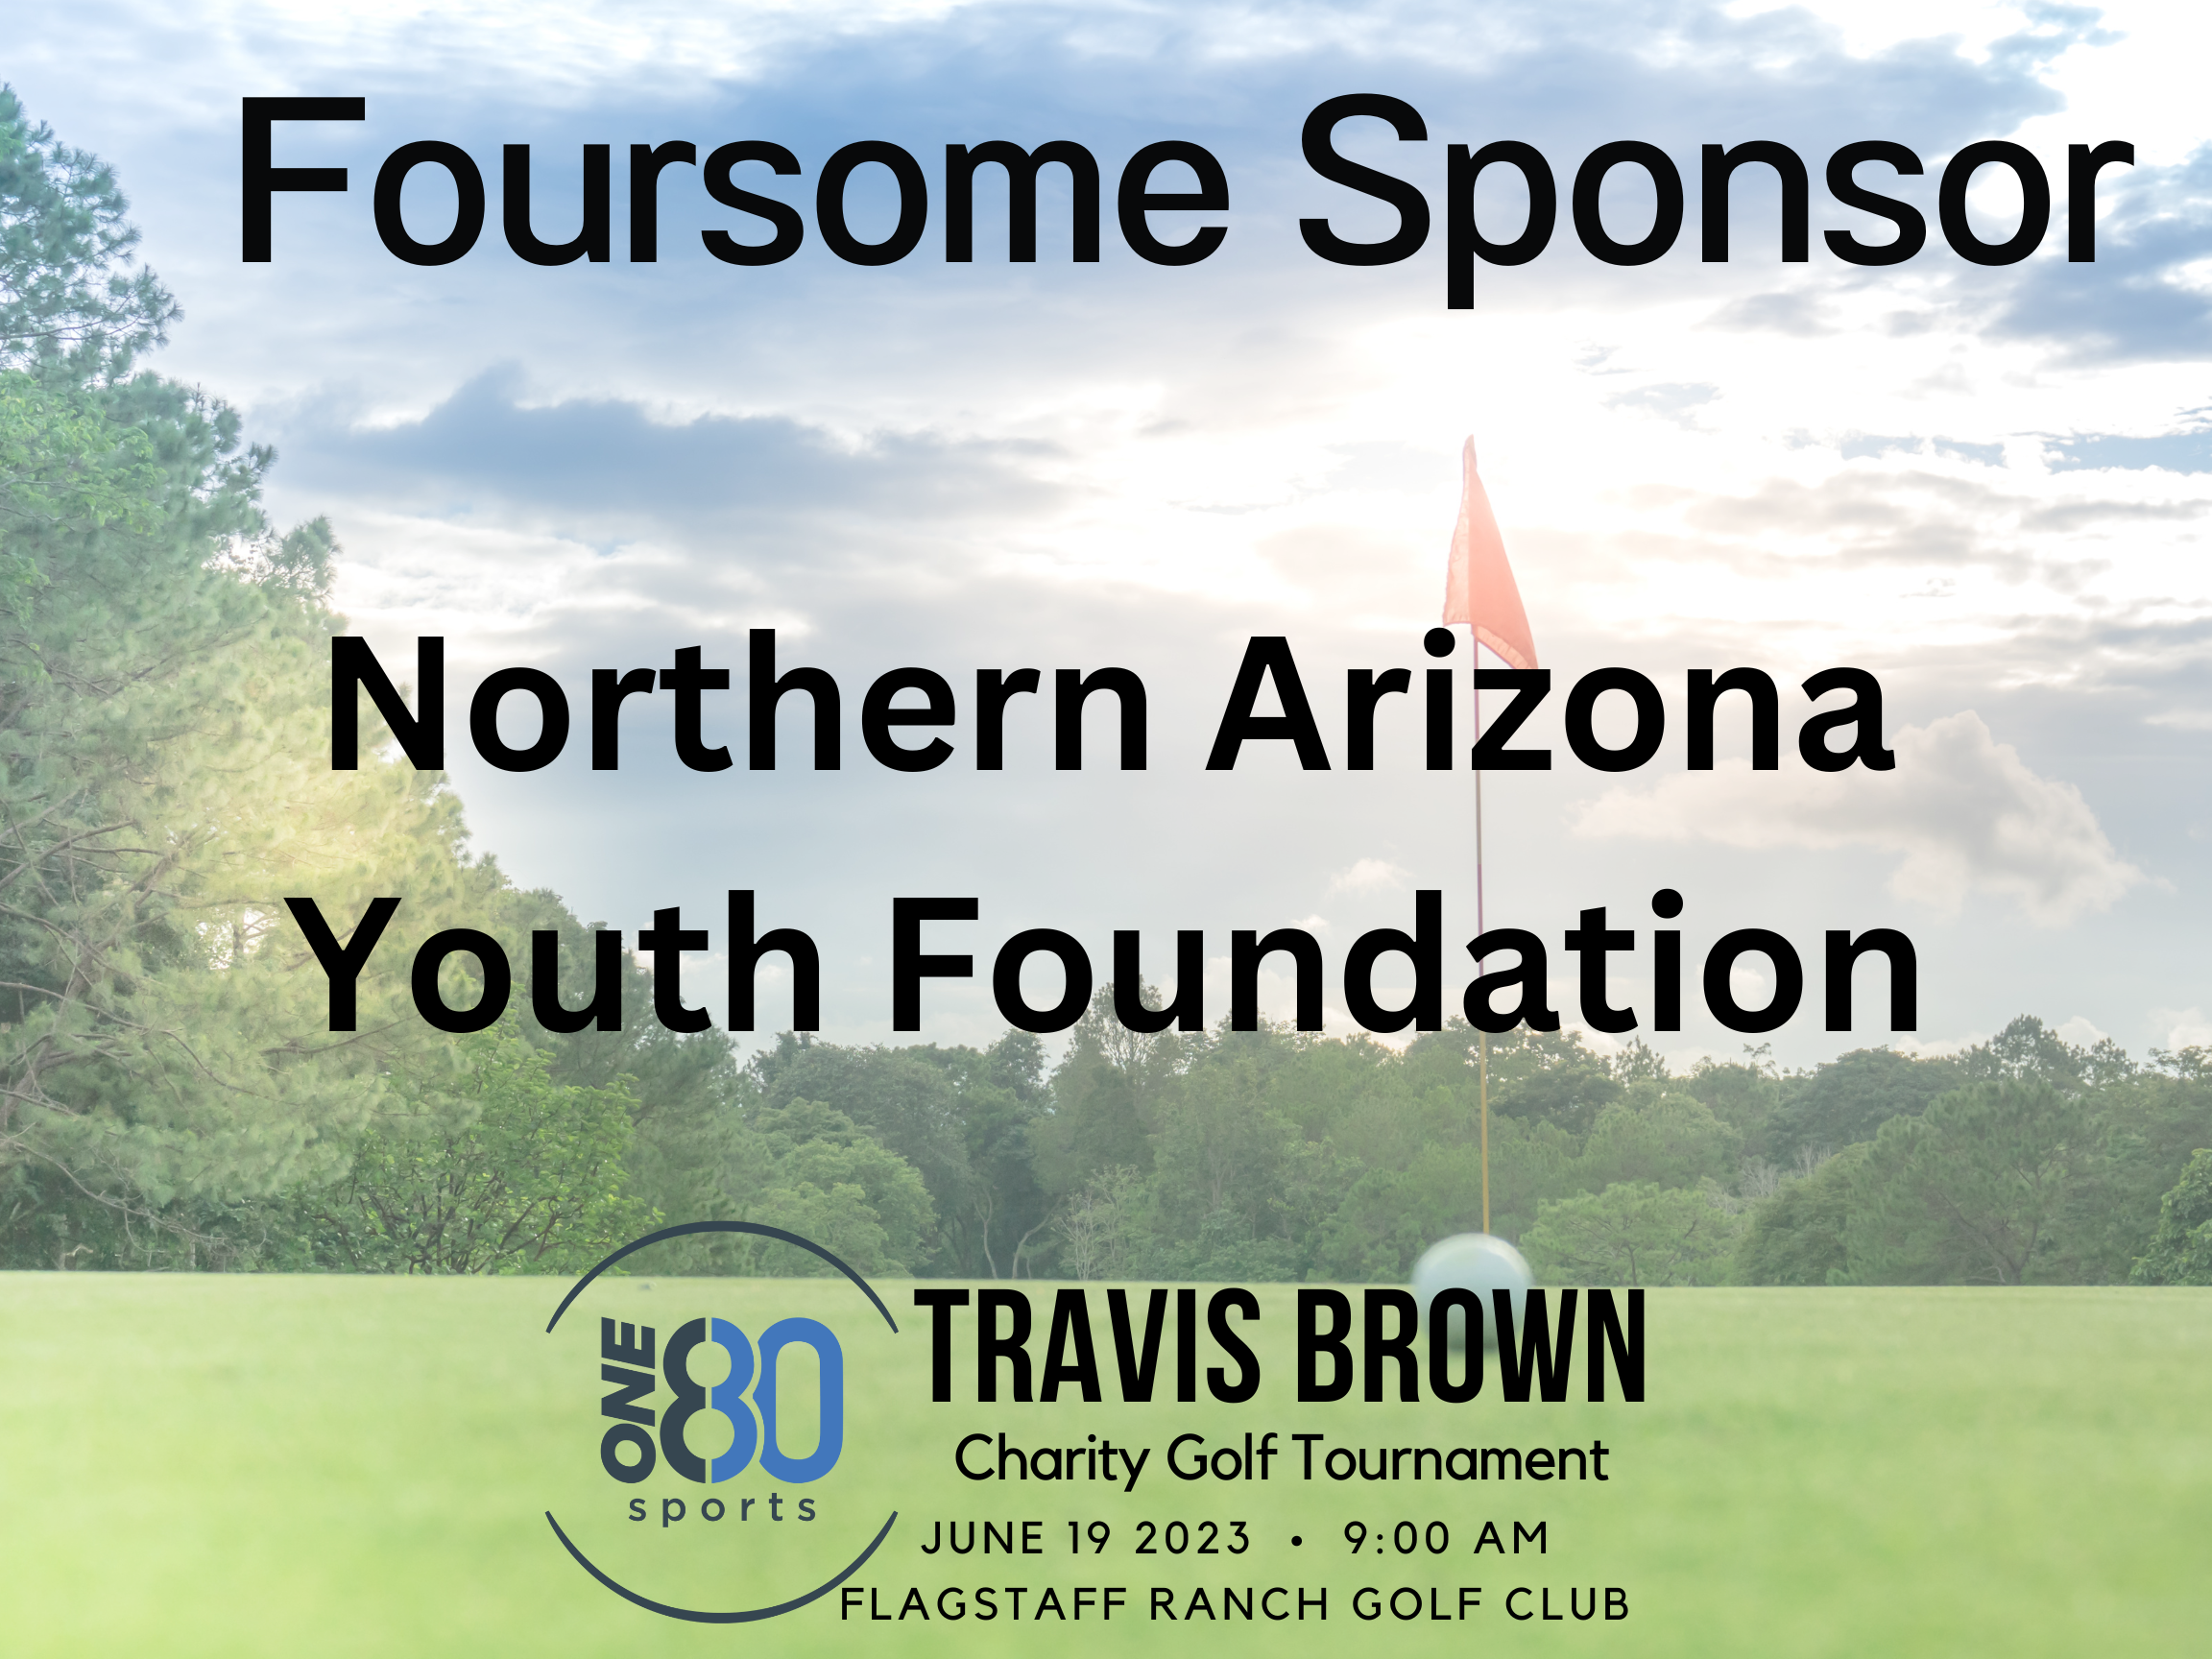 Northern Arizona Youth Foundation Foursome Sponsor Post.png